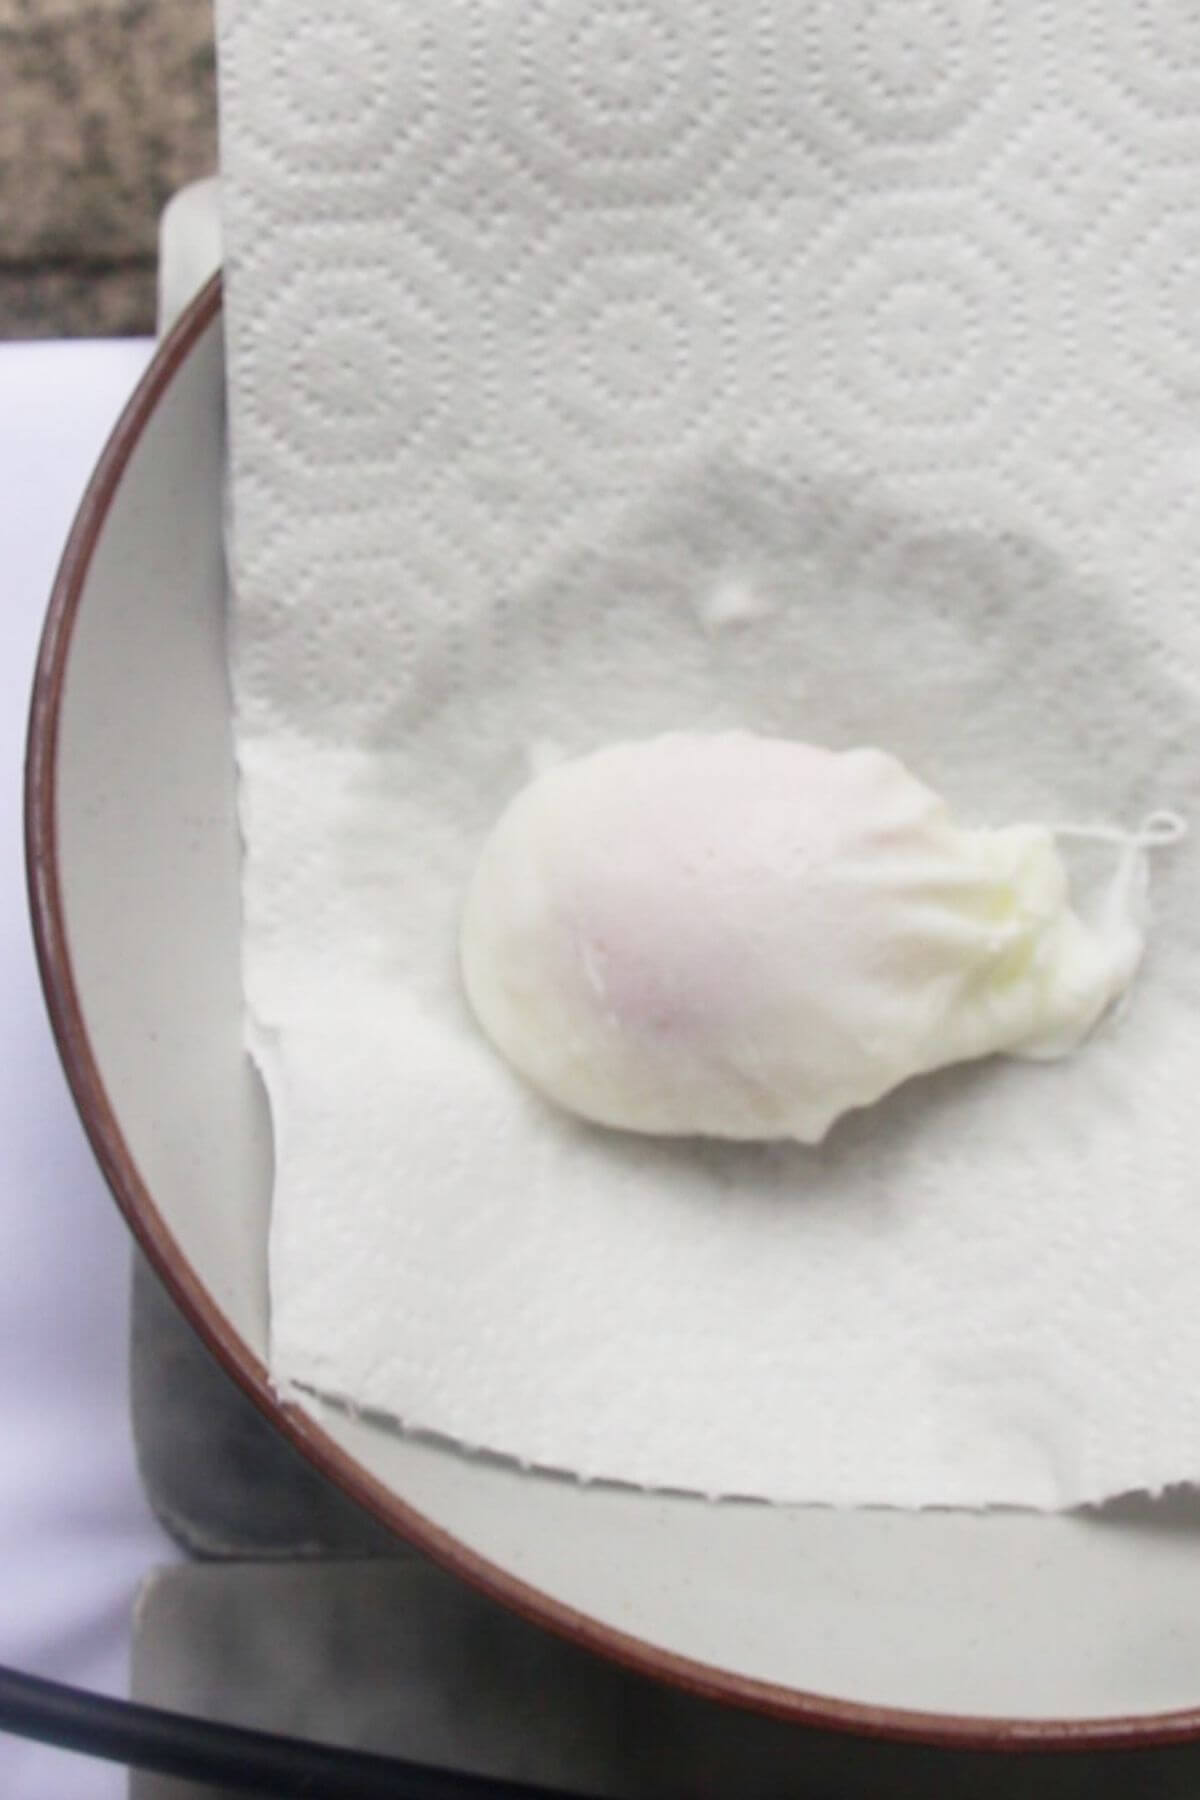 One poached egg draining on a paper towel on a plate.